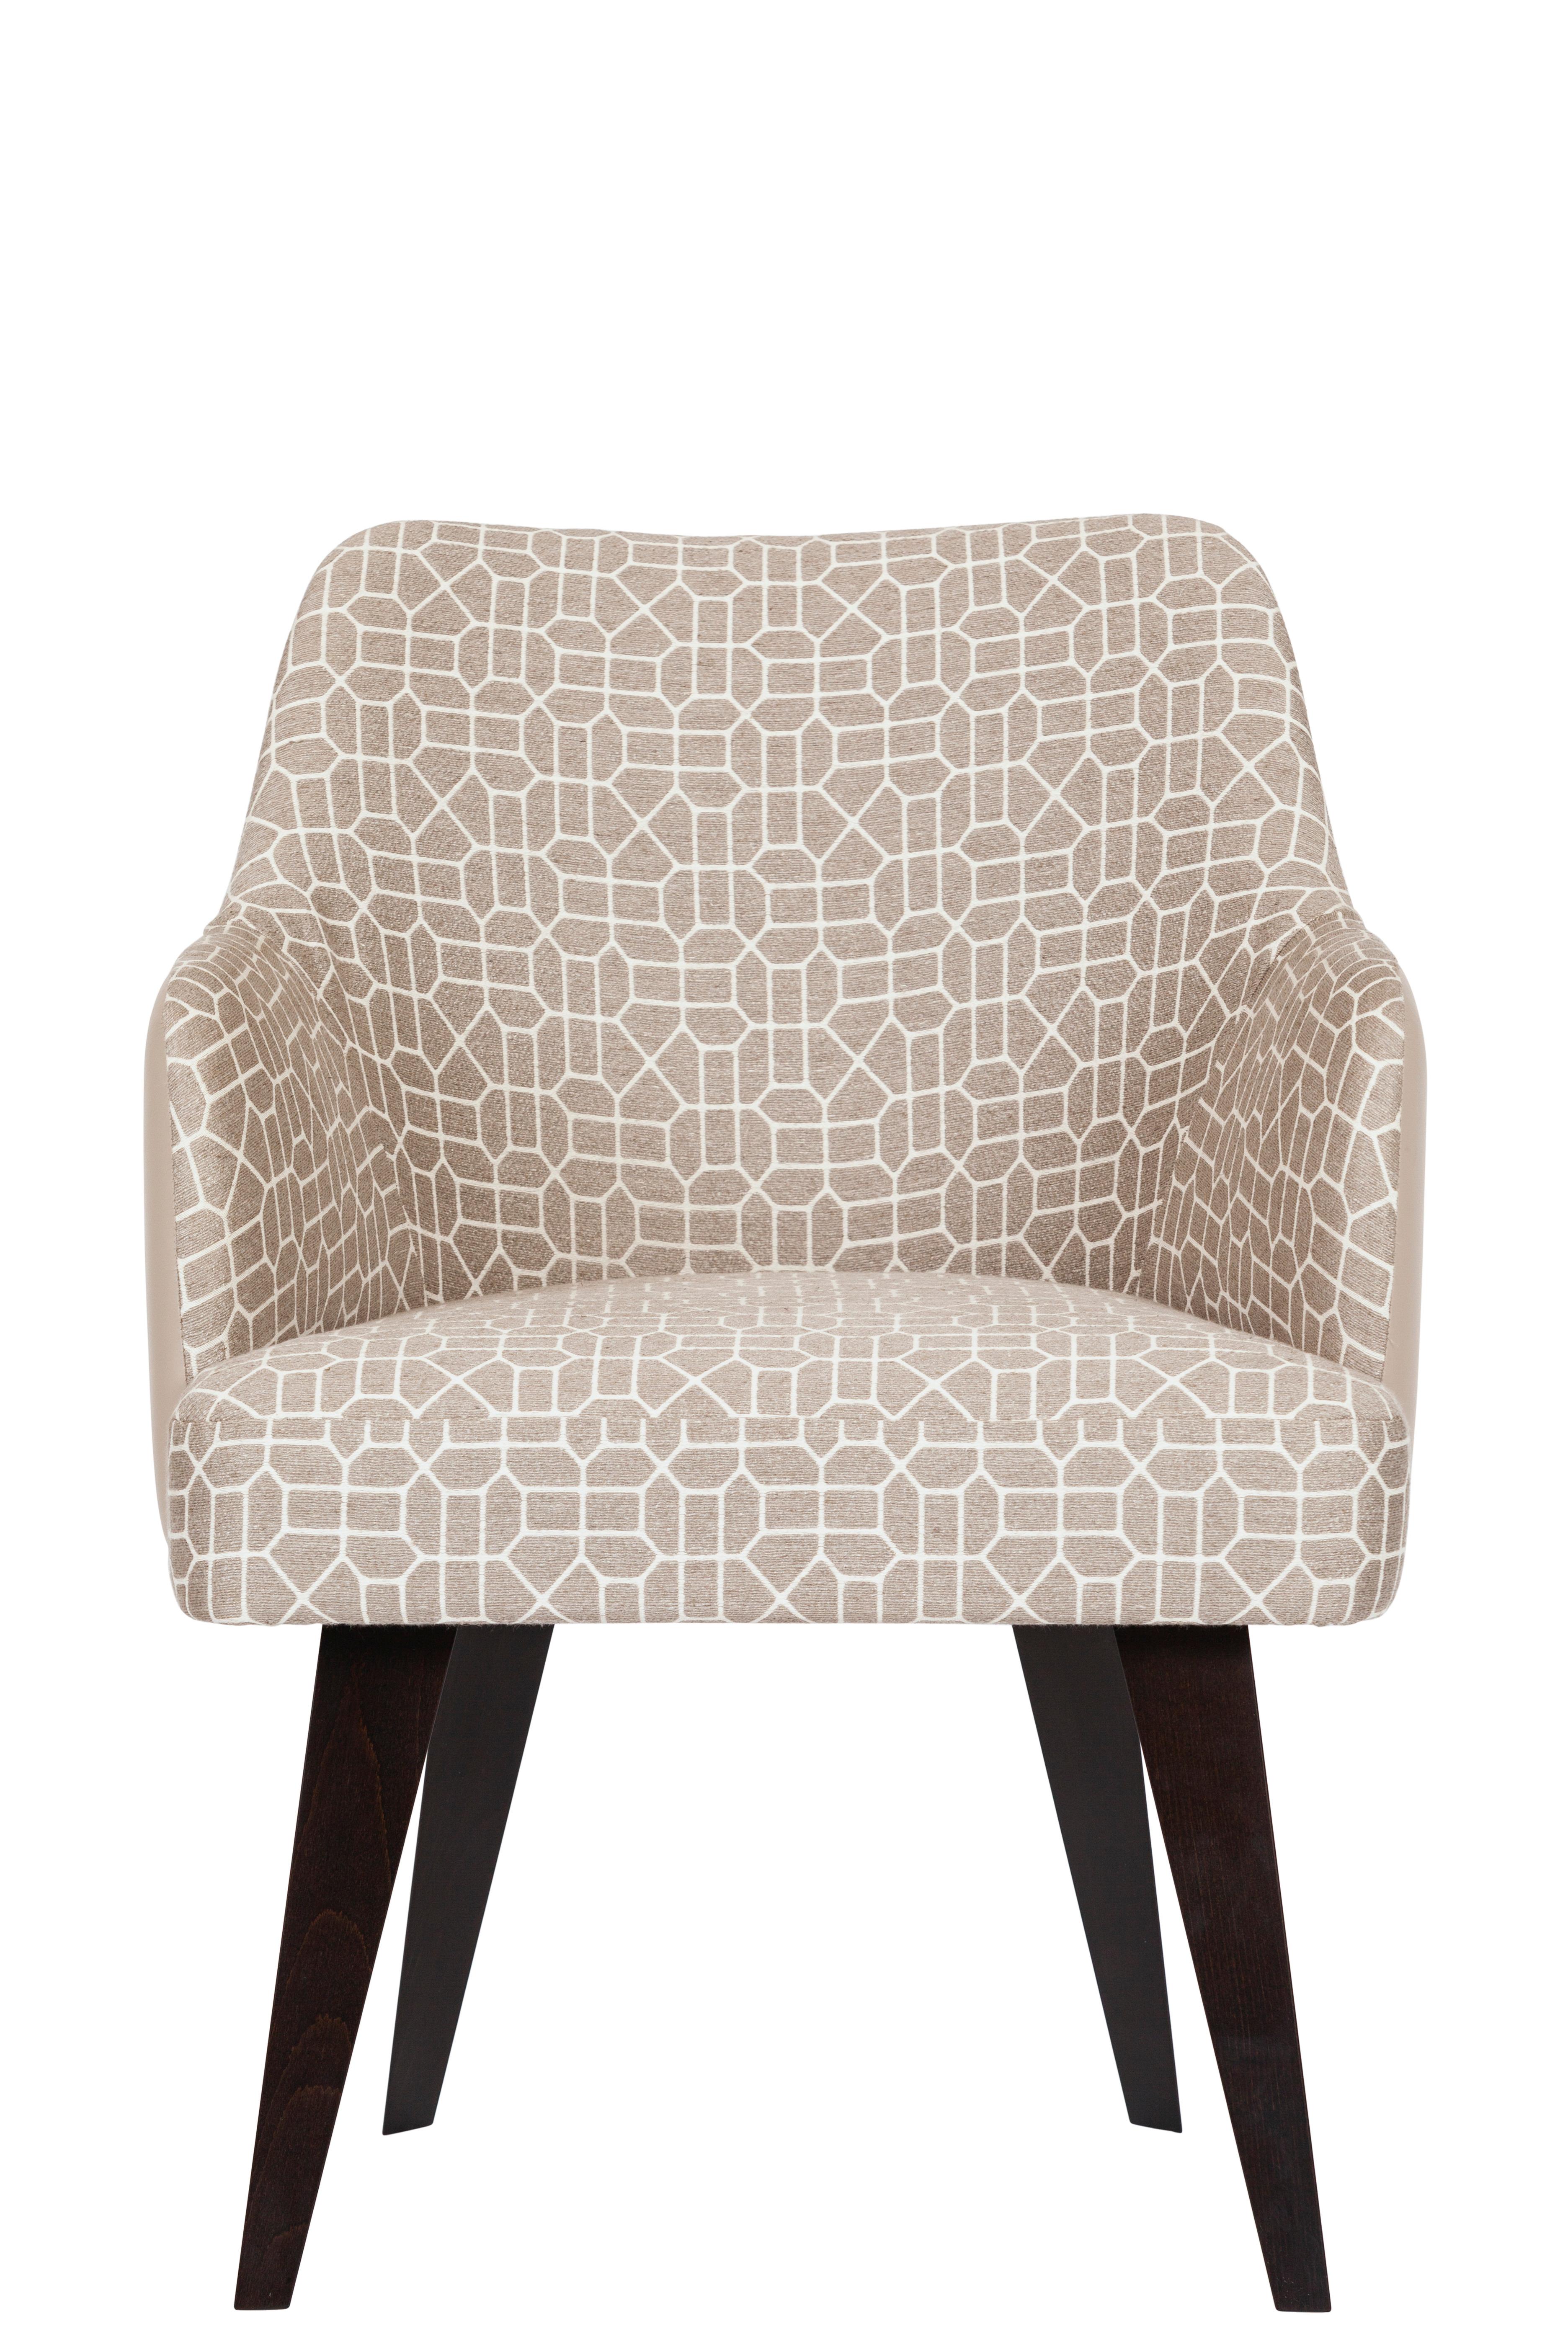 Modern Margot Dining Chairs, Cream Leather, Handmade in Portugal by Greenapple For Sale 3